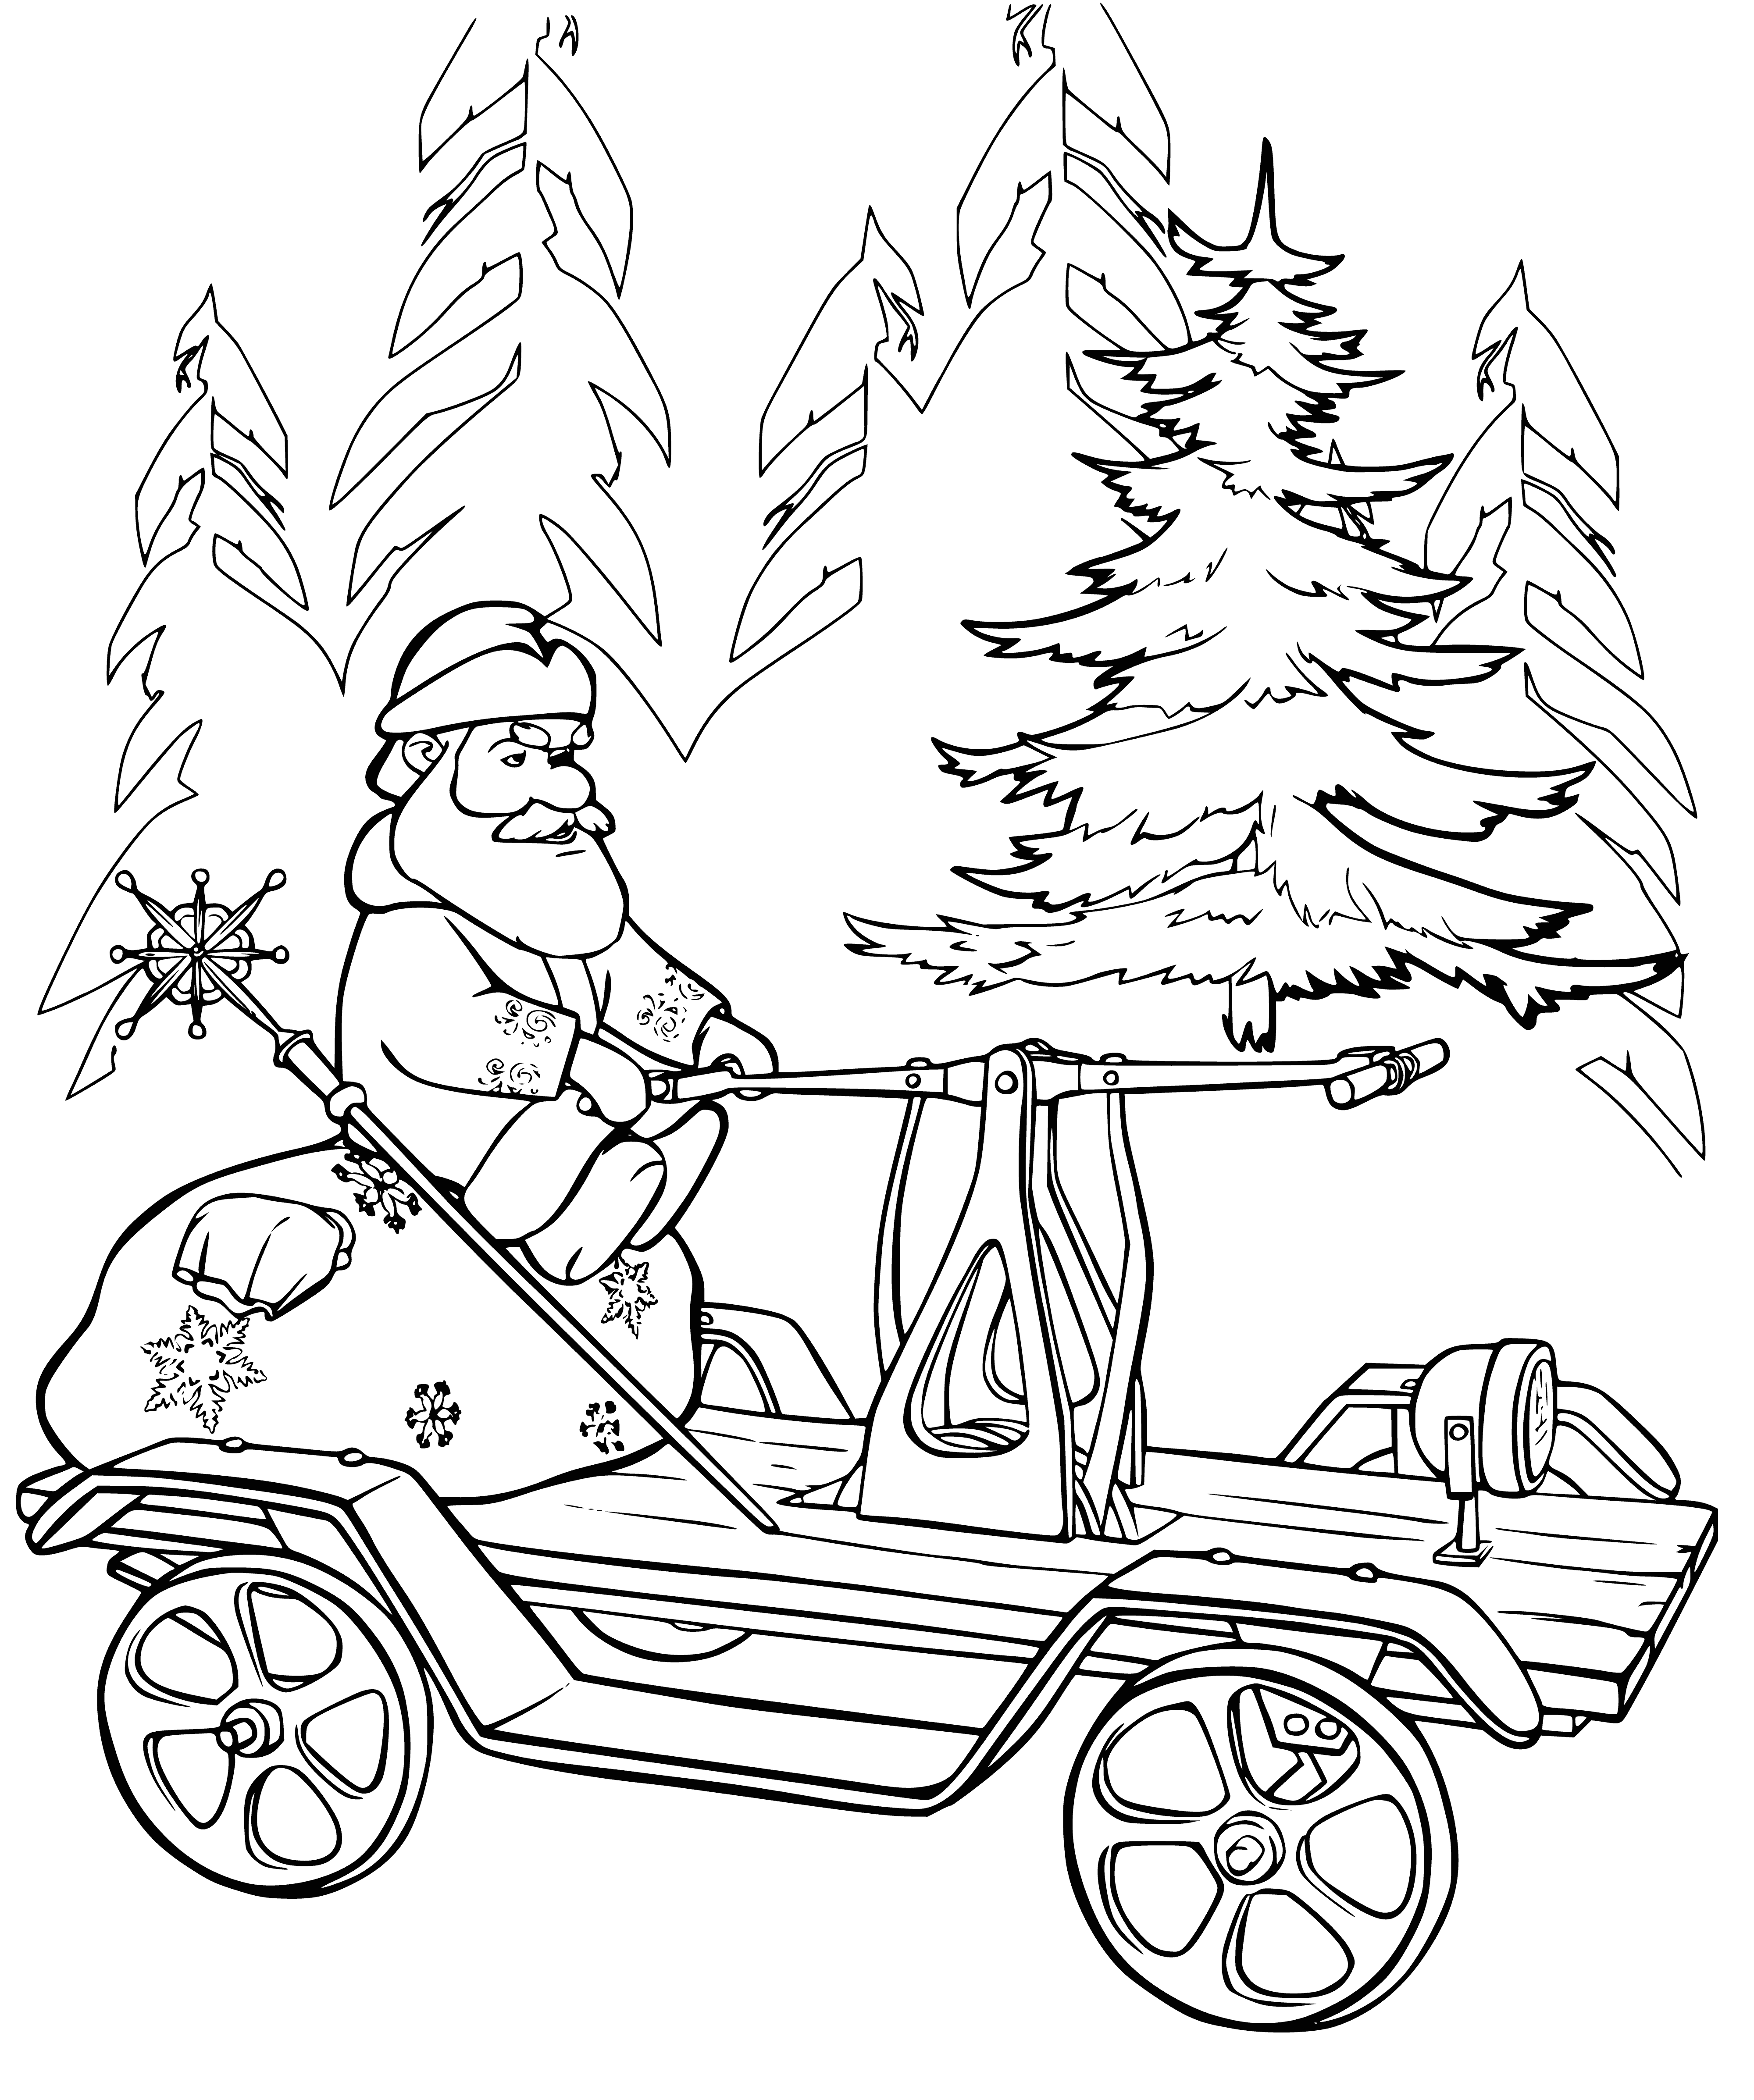 coloring page: Santa Claus is waving from a railcar in a coloring page! #christmas #santaclaus